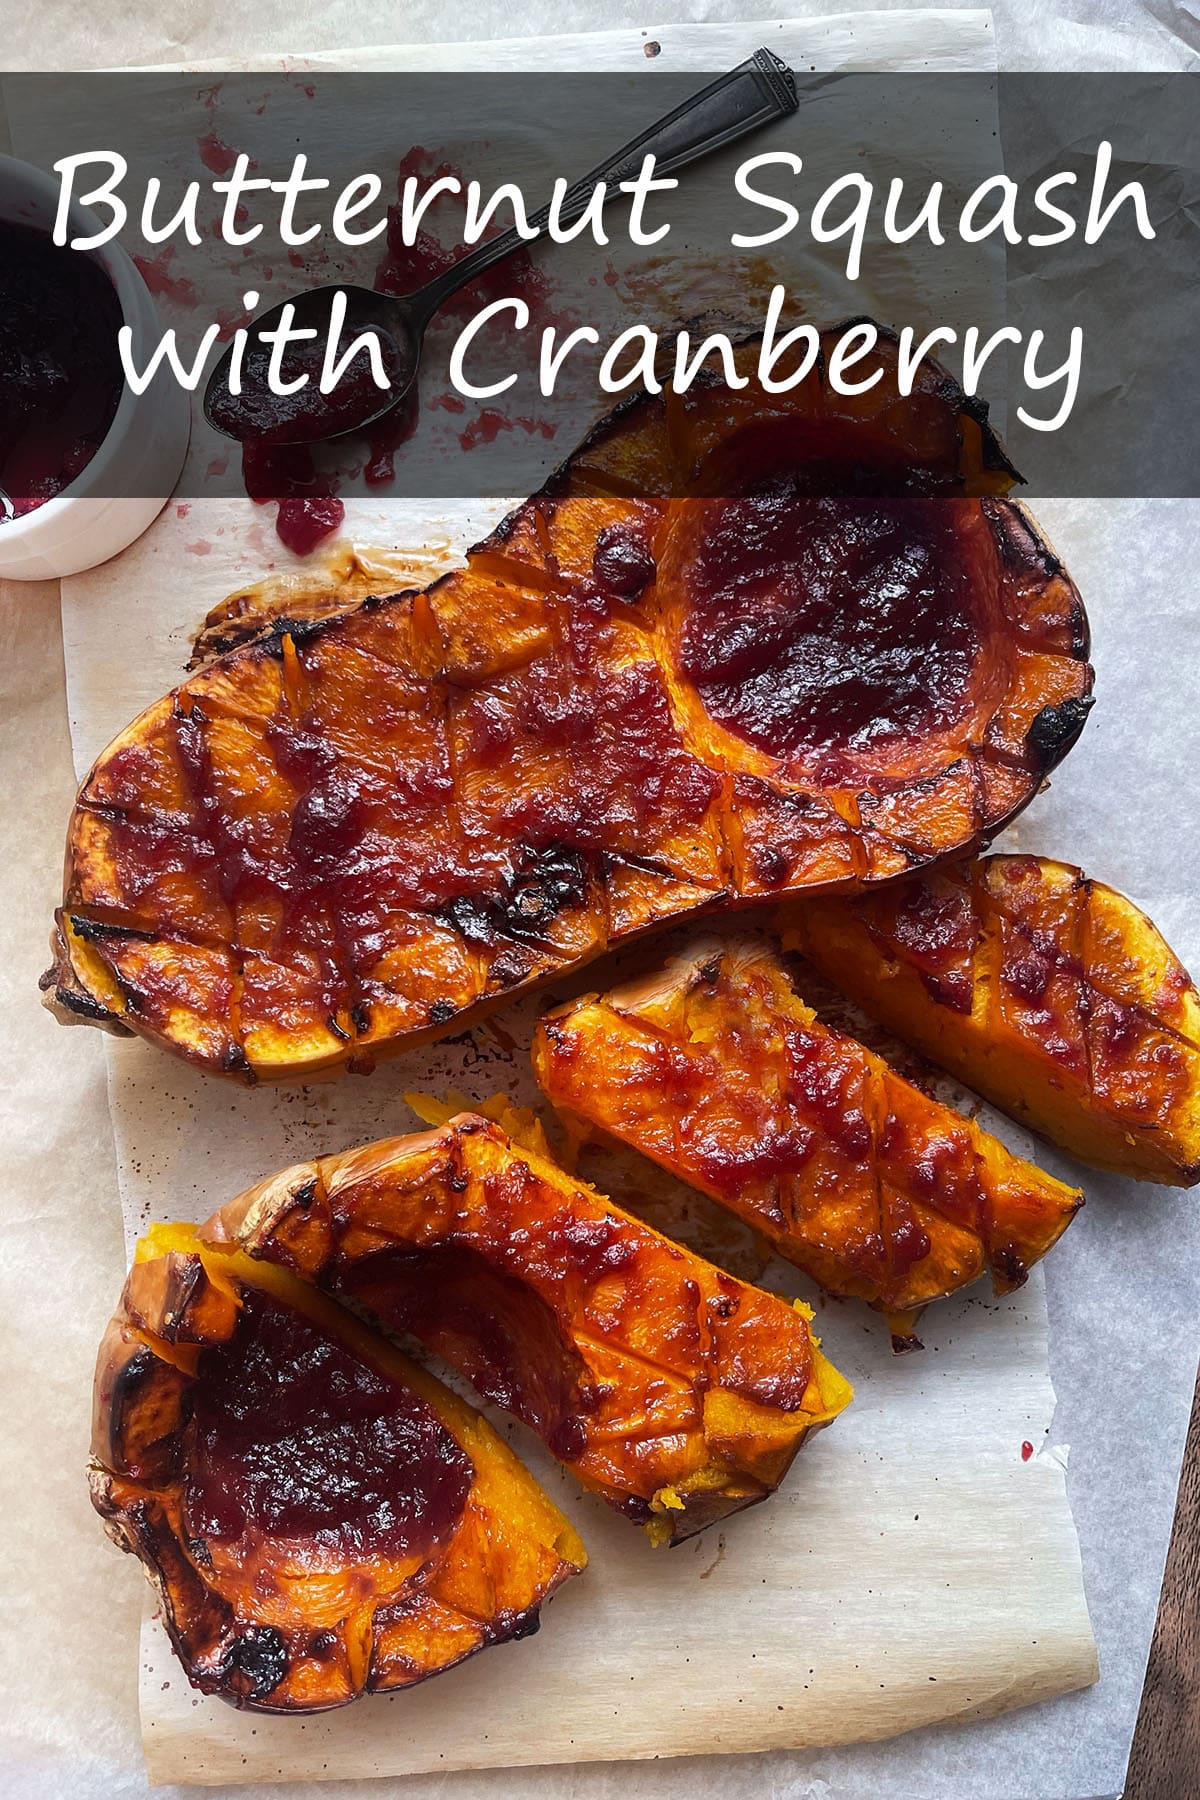 Roasted Butternut Squash with Cranberry Glaze